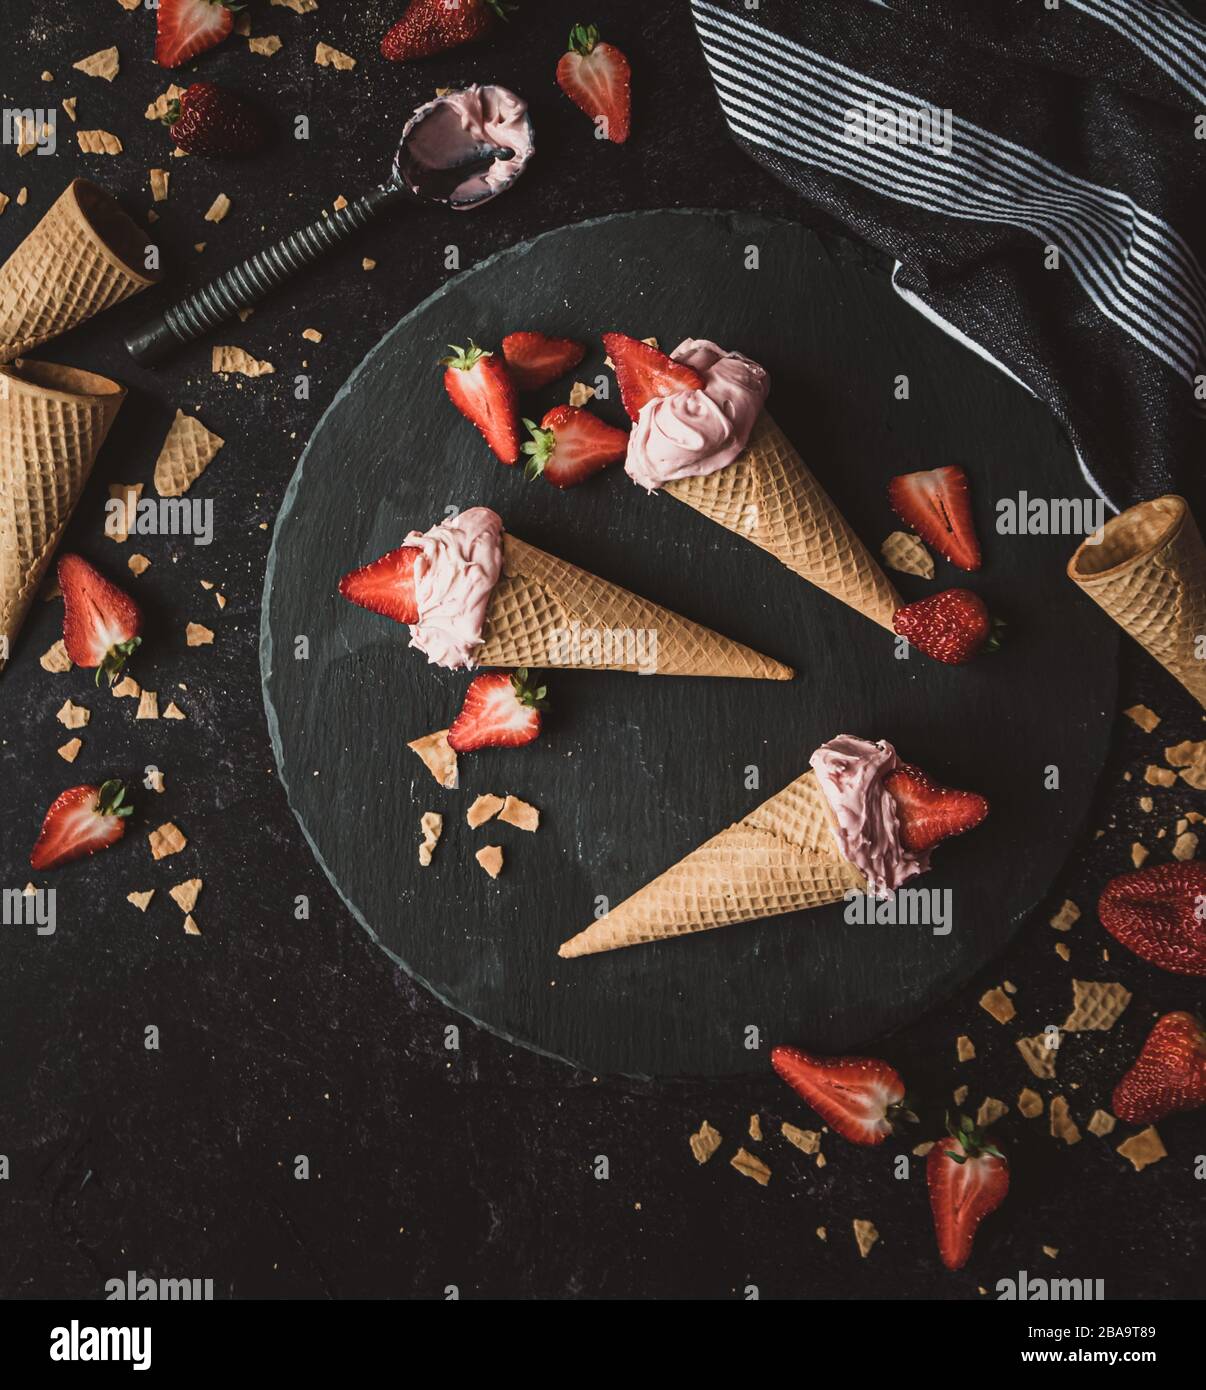 Top view of strawberry ice cream cones on a black background. Stock Photo